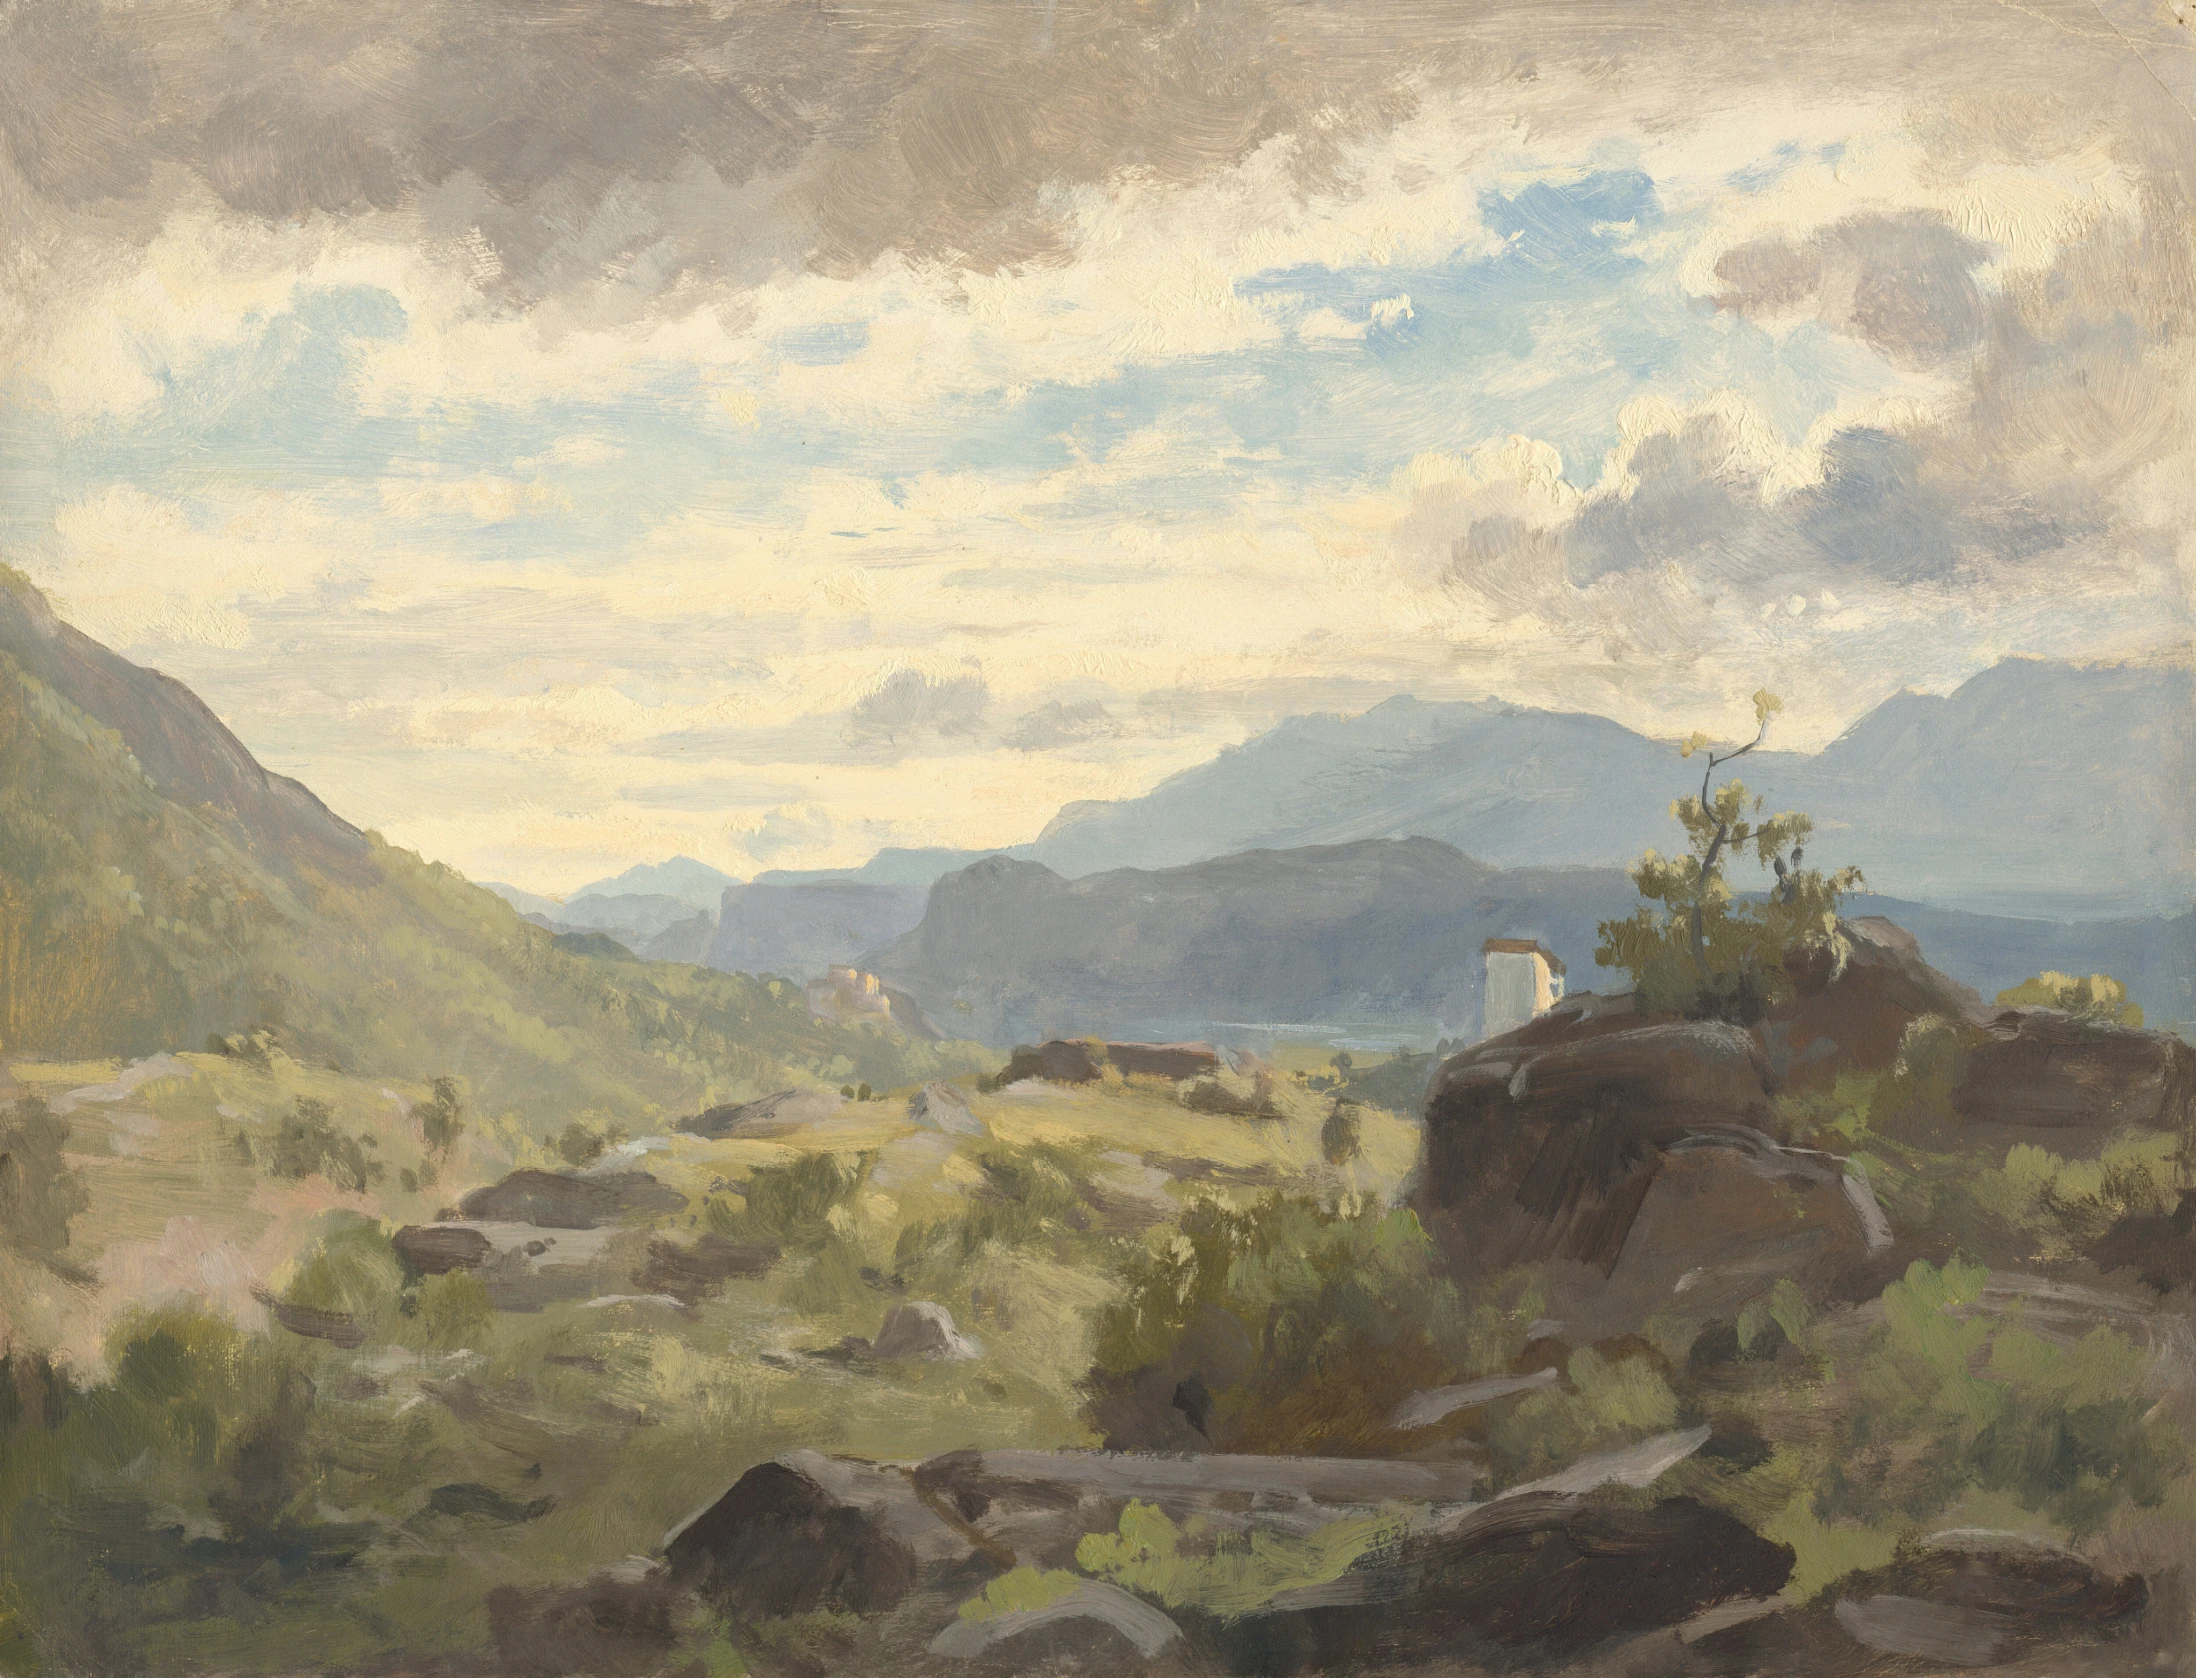 a painting with hills and clouds in the background